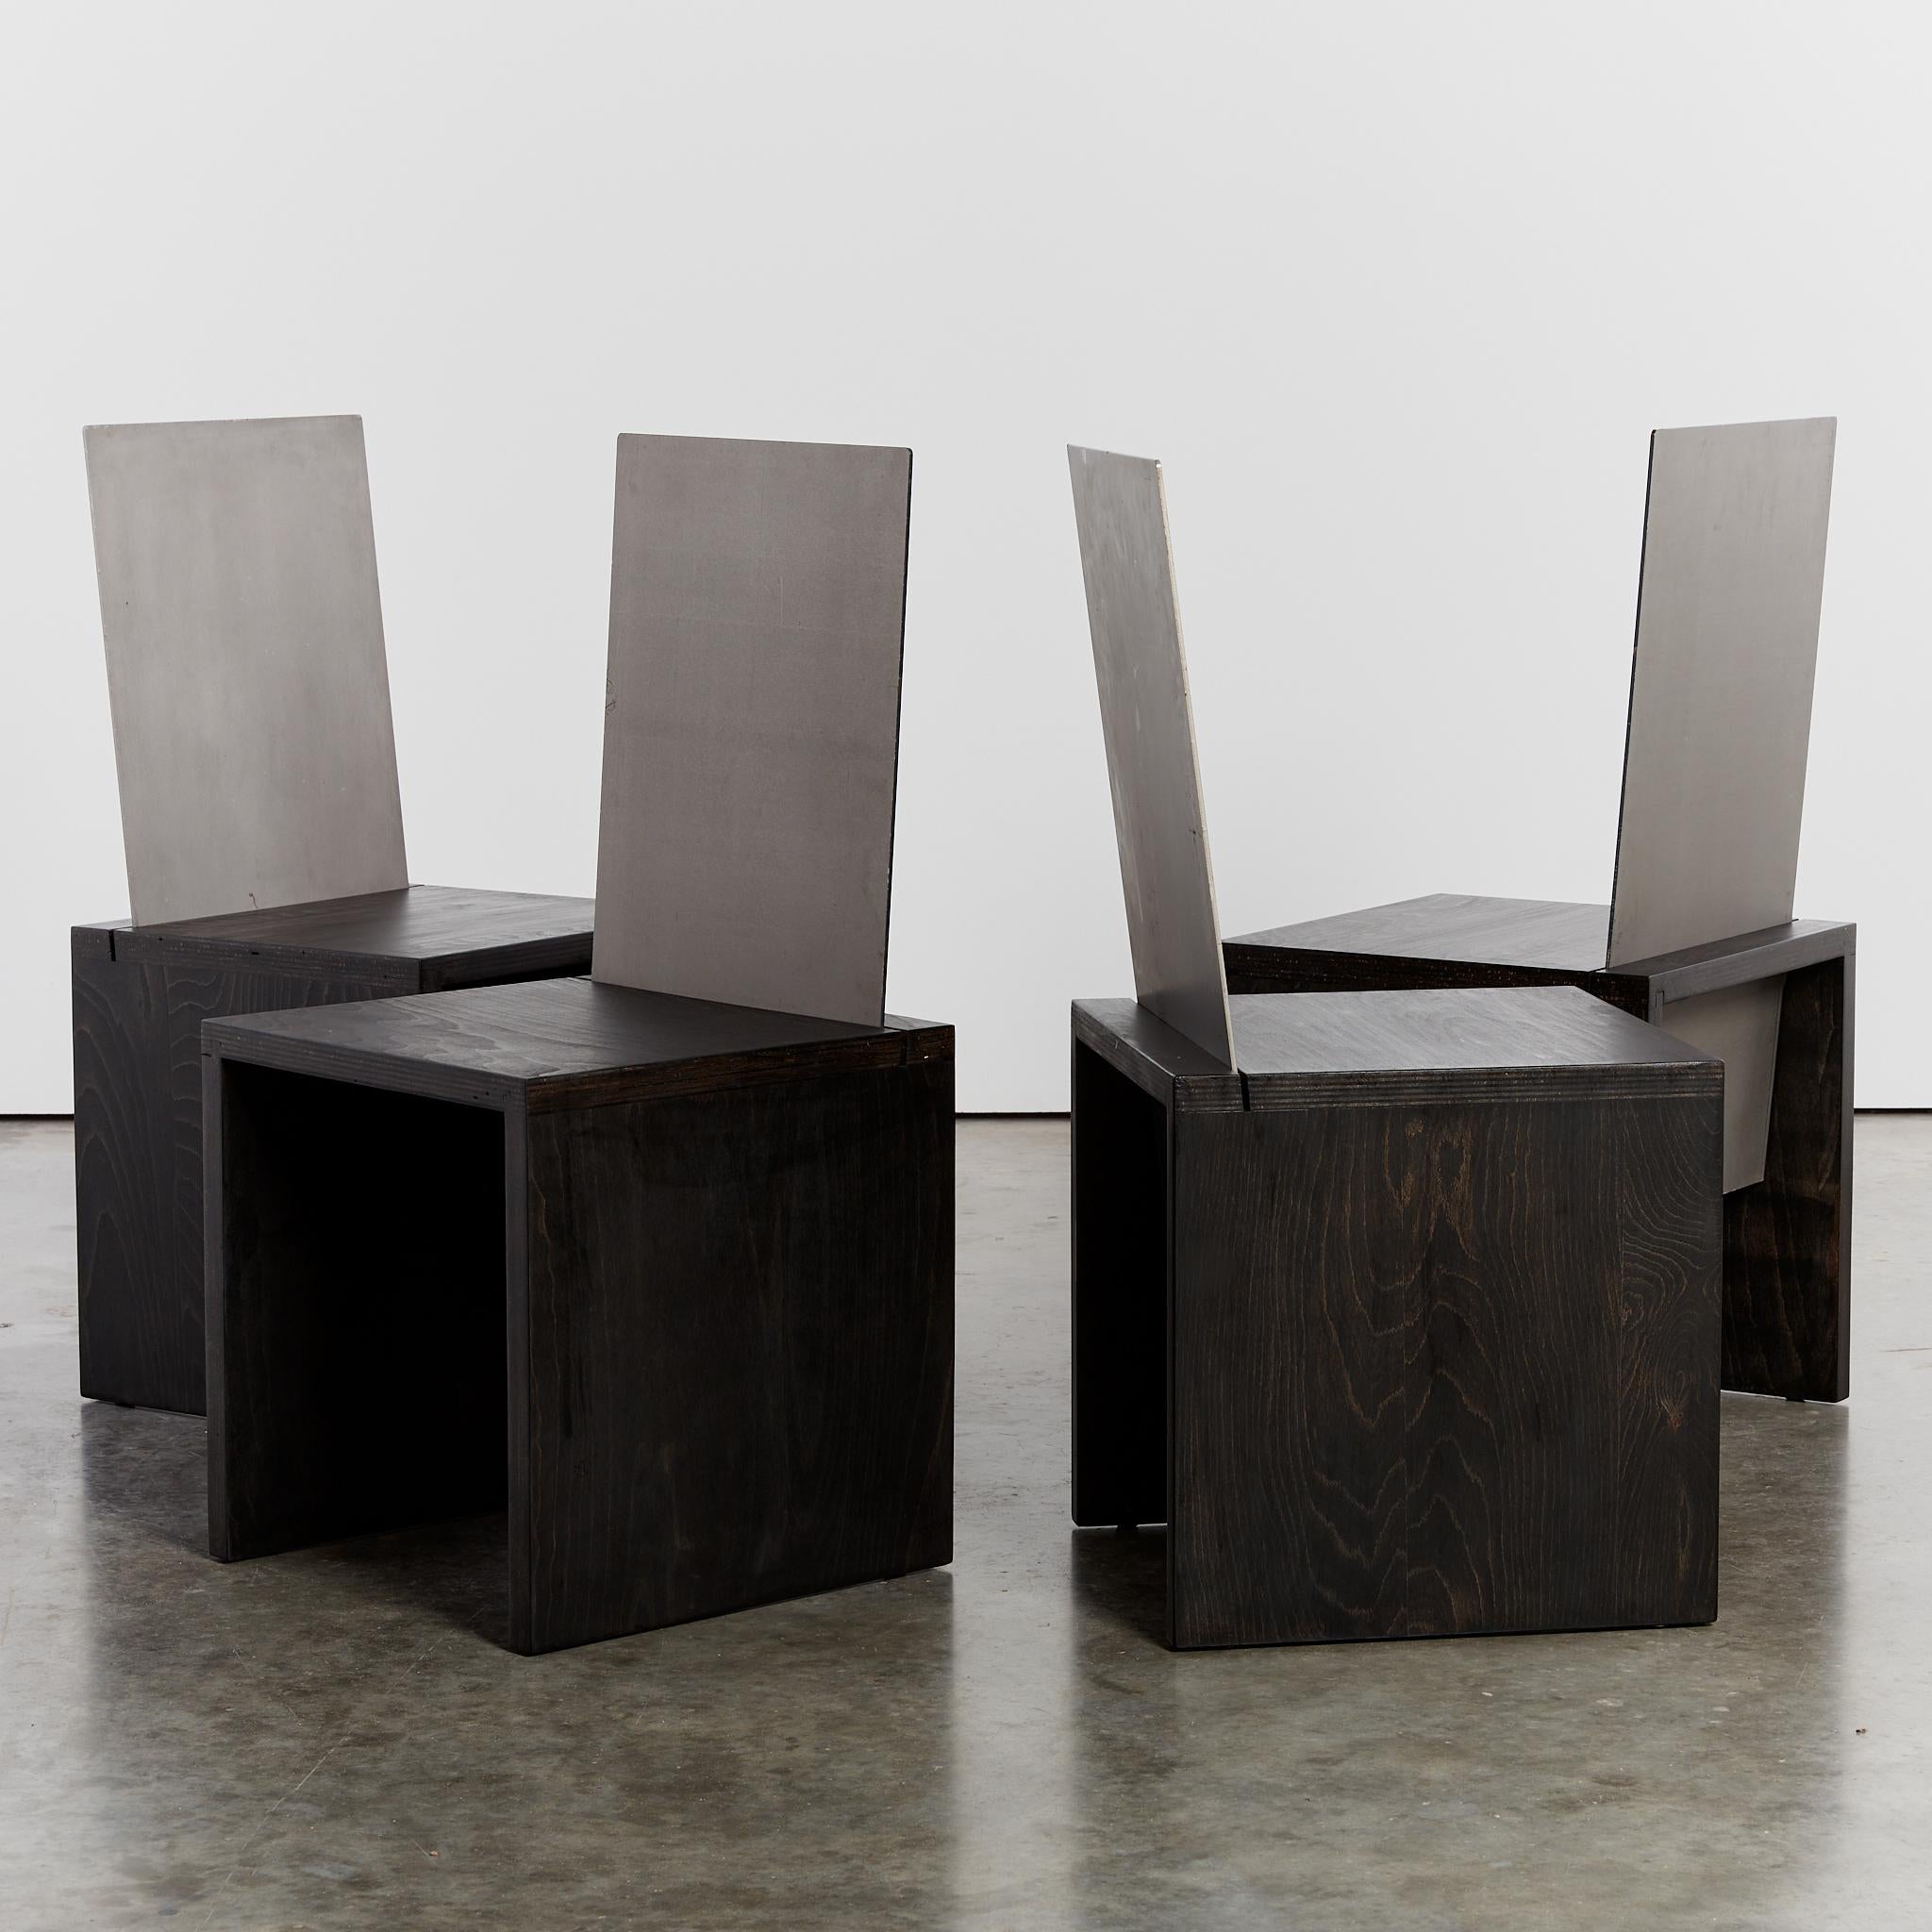 Set of four solid steel back chairs, with ebonised ply bases. With a silhouette reminiscent of Donald Judd's Chair 84, each chair features a 5mm steel back, that cuts through the ebonised base.

Sold as a set of 4.

Designer: No attribution,